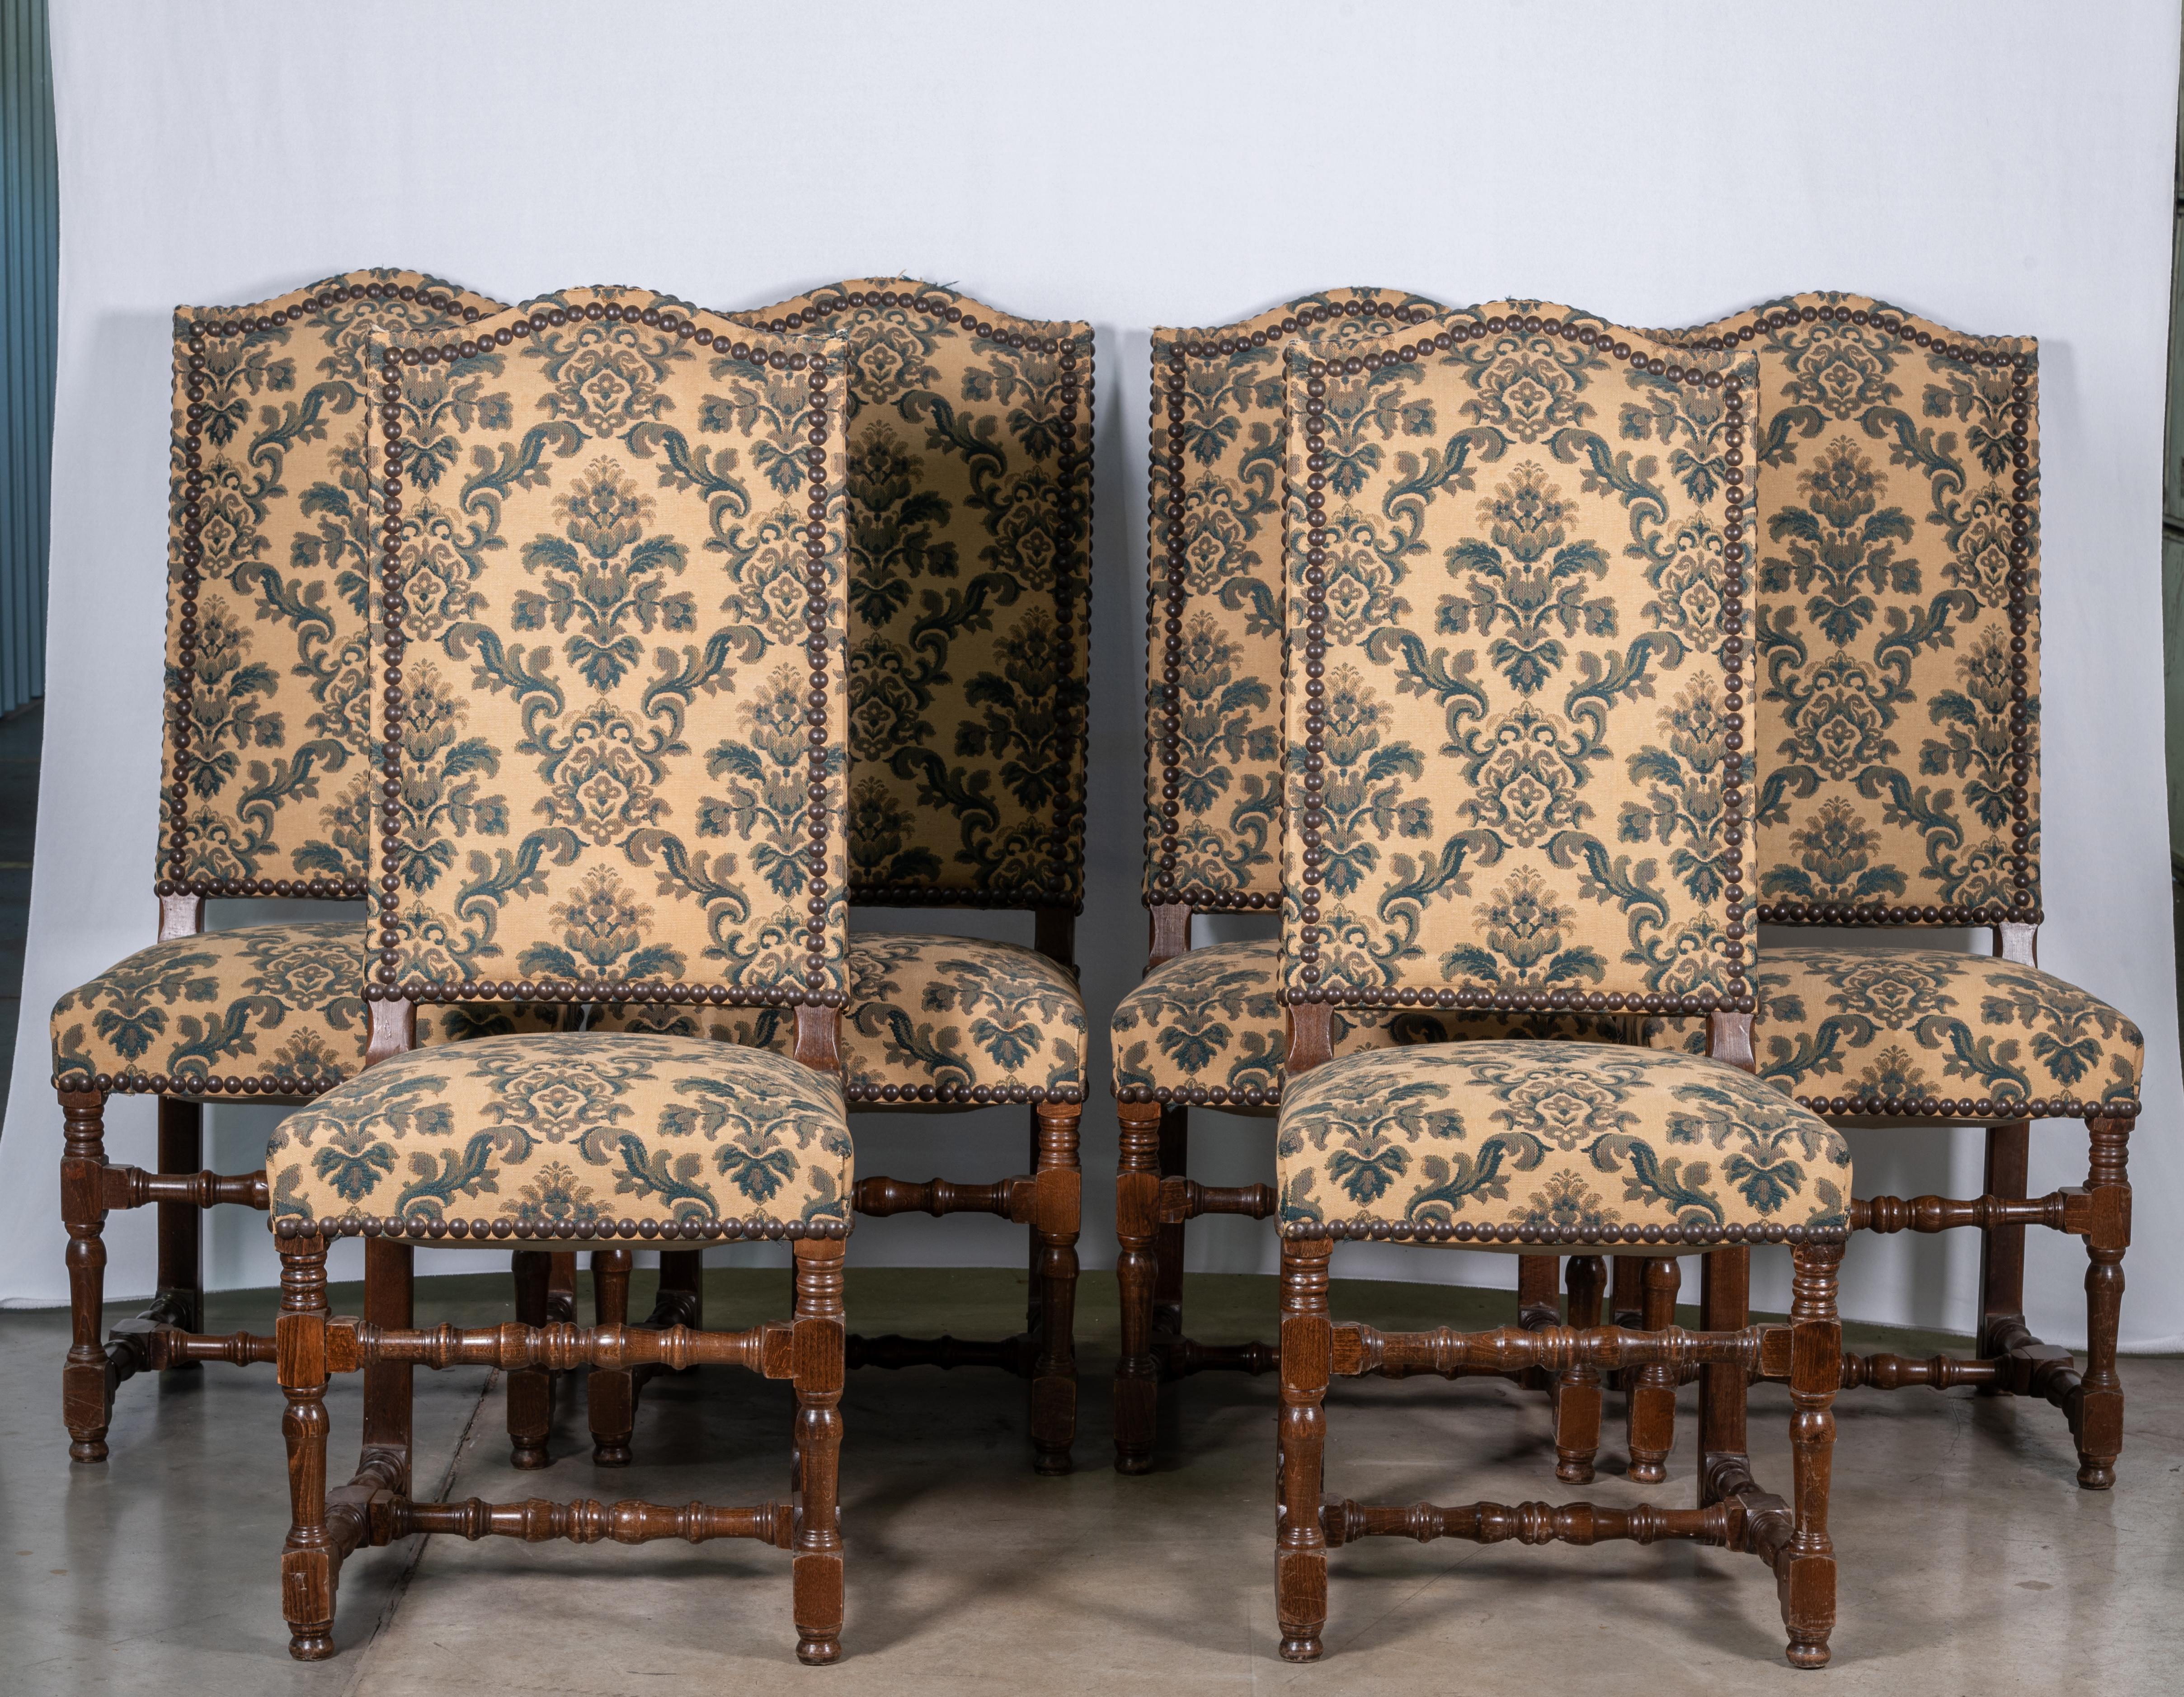 Enhance your dining ambiance with our Set of Six 19th French Oak Dining Chairs, adorned with a delightful flower and vine fabric pattern. Crafted from premium oak wood, these chairs exude rustic charm and timeless elegance. Each chair features a